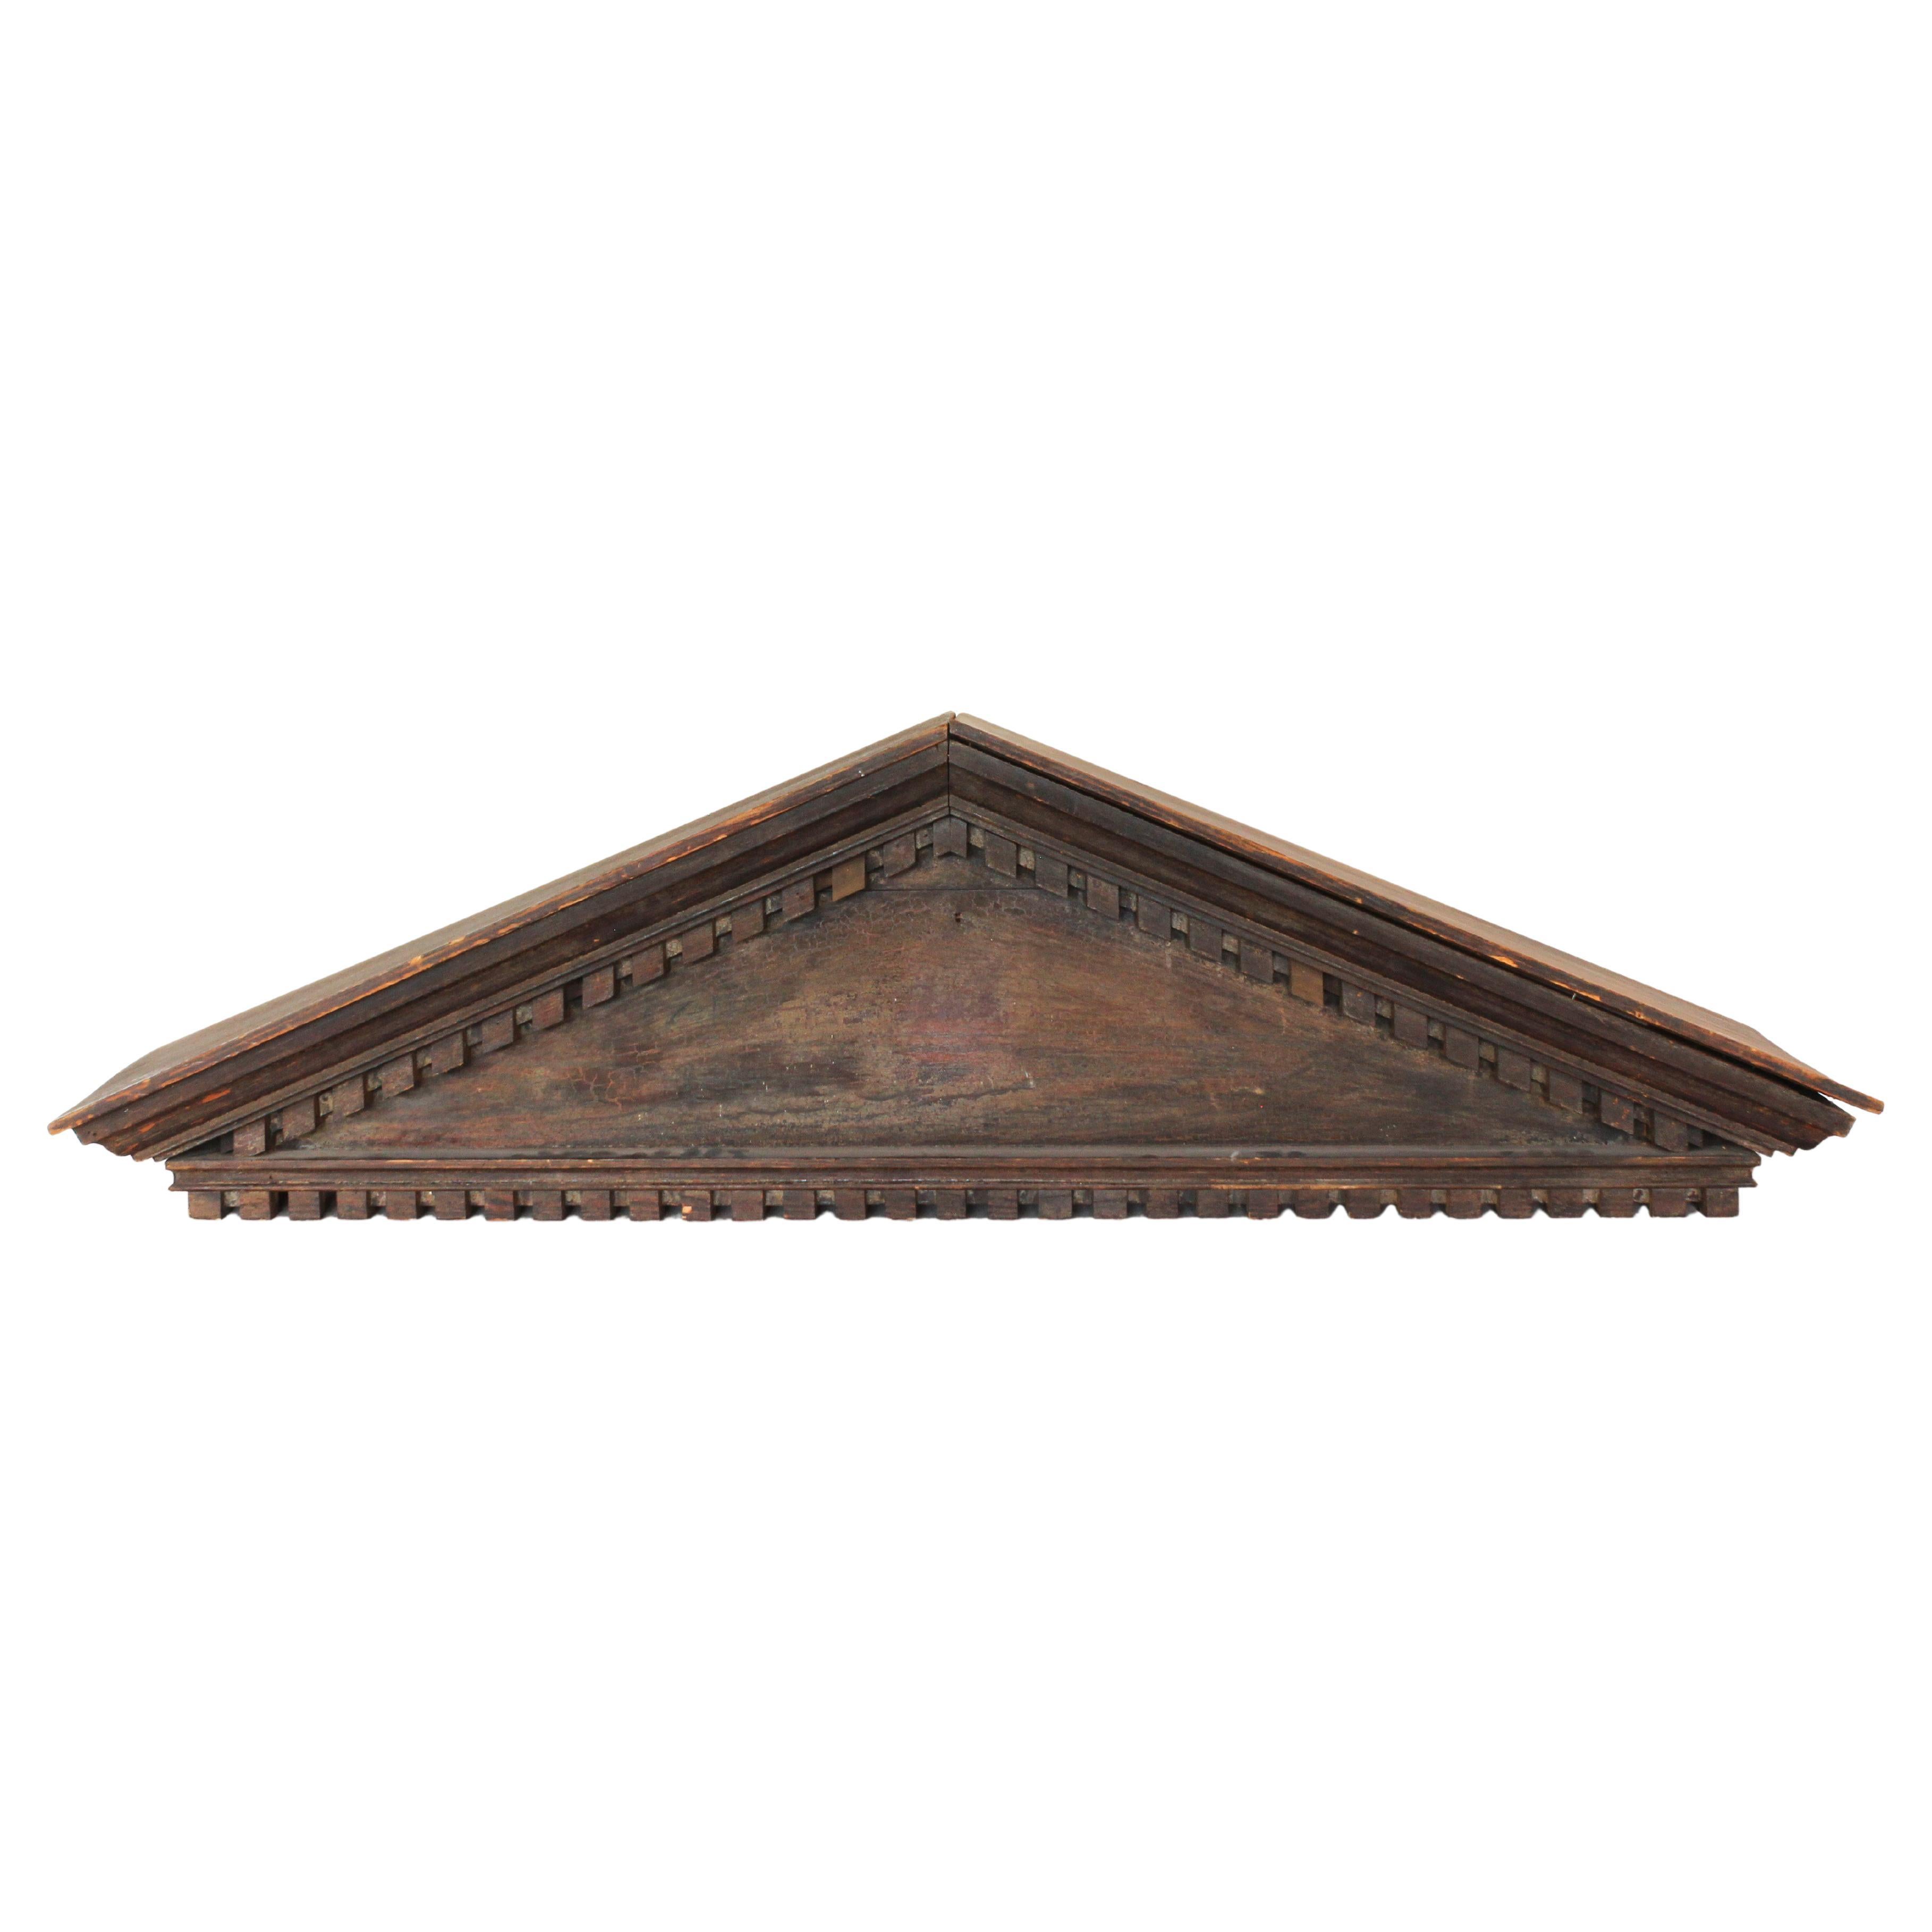 19th century carved wood architectural salvage/fragment pediment. Would work well as the crown of a case piece, has hooks for hanging on the wall.